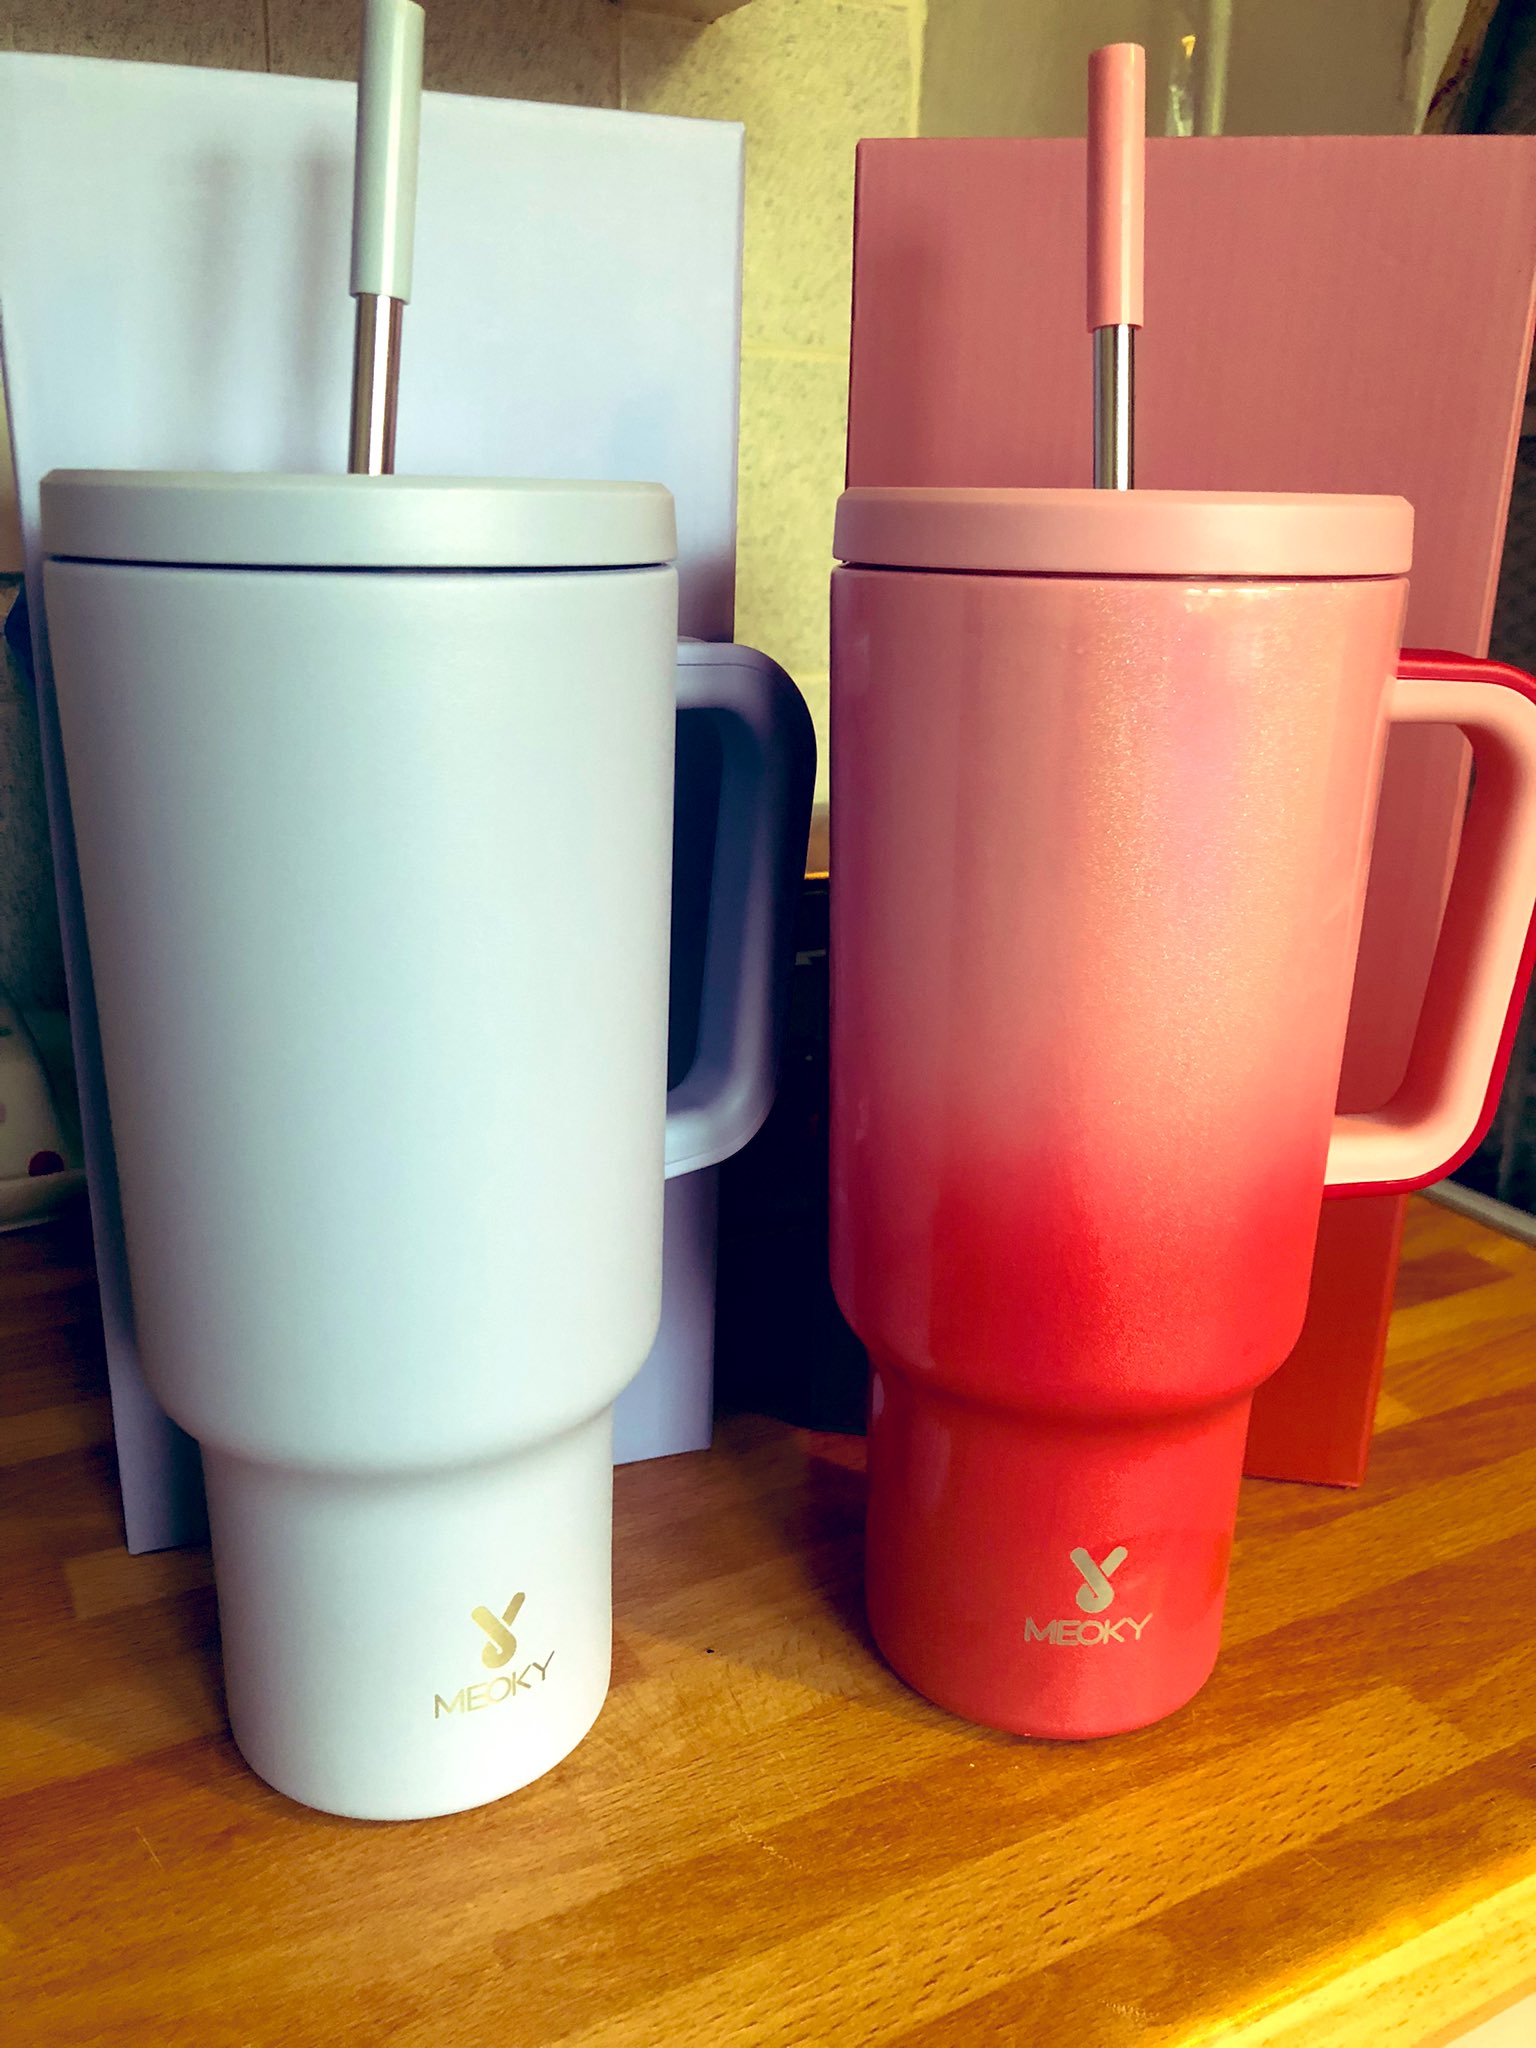 Helen on X: Little miss and I were treated to a new Meoky cup by